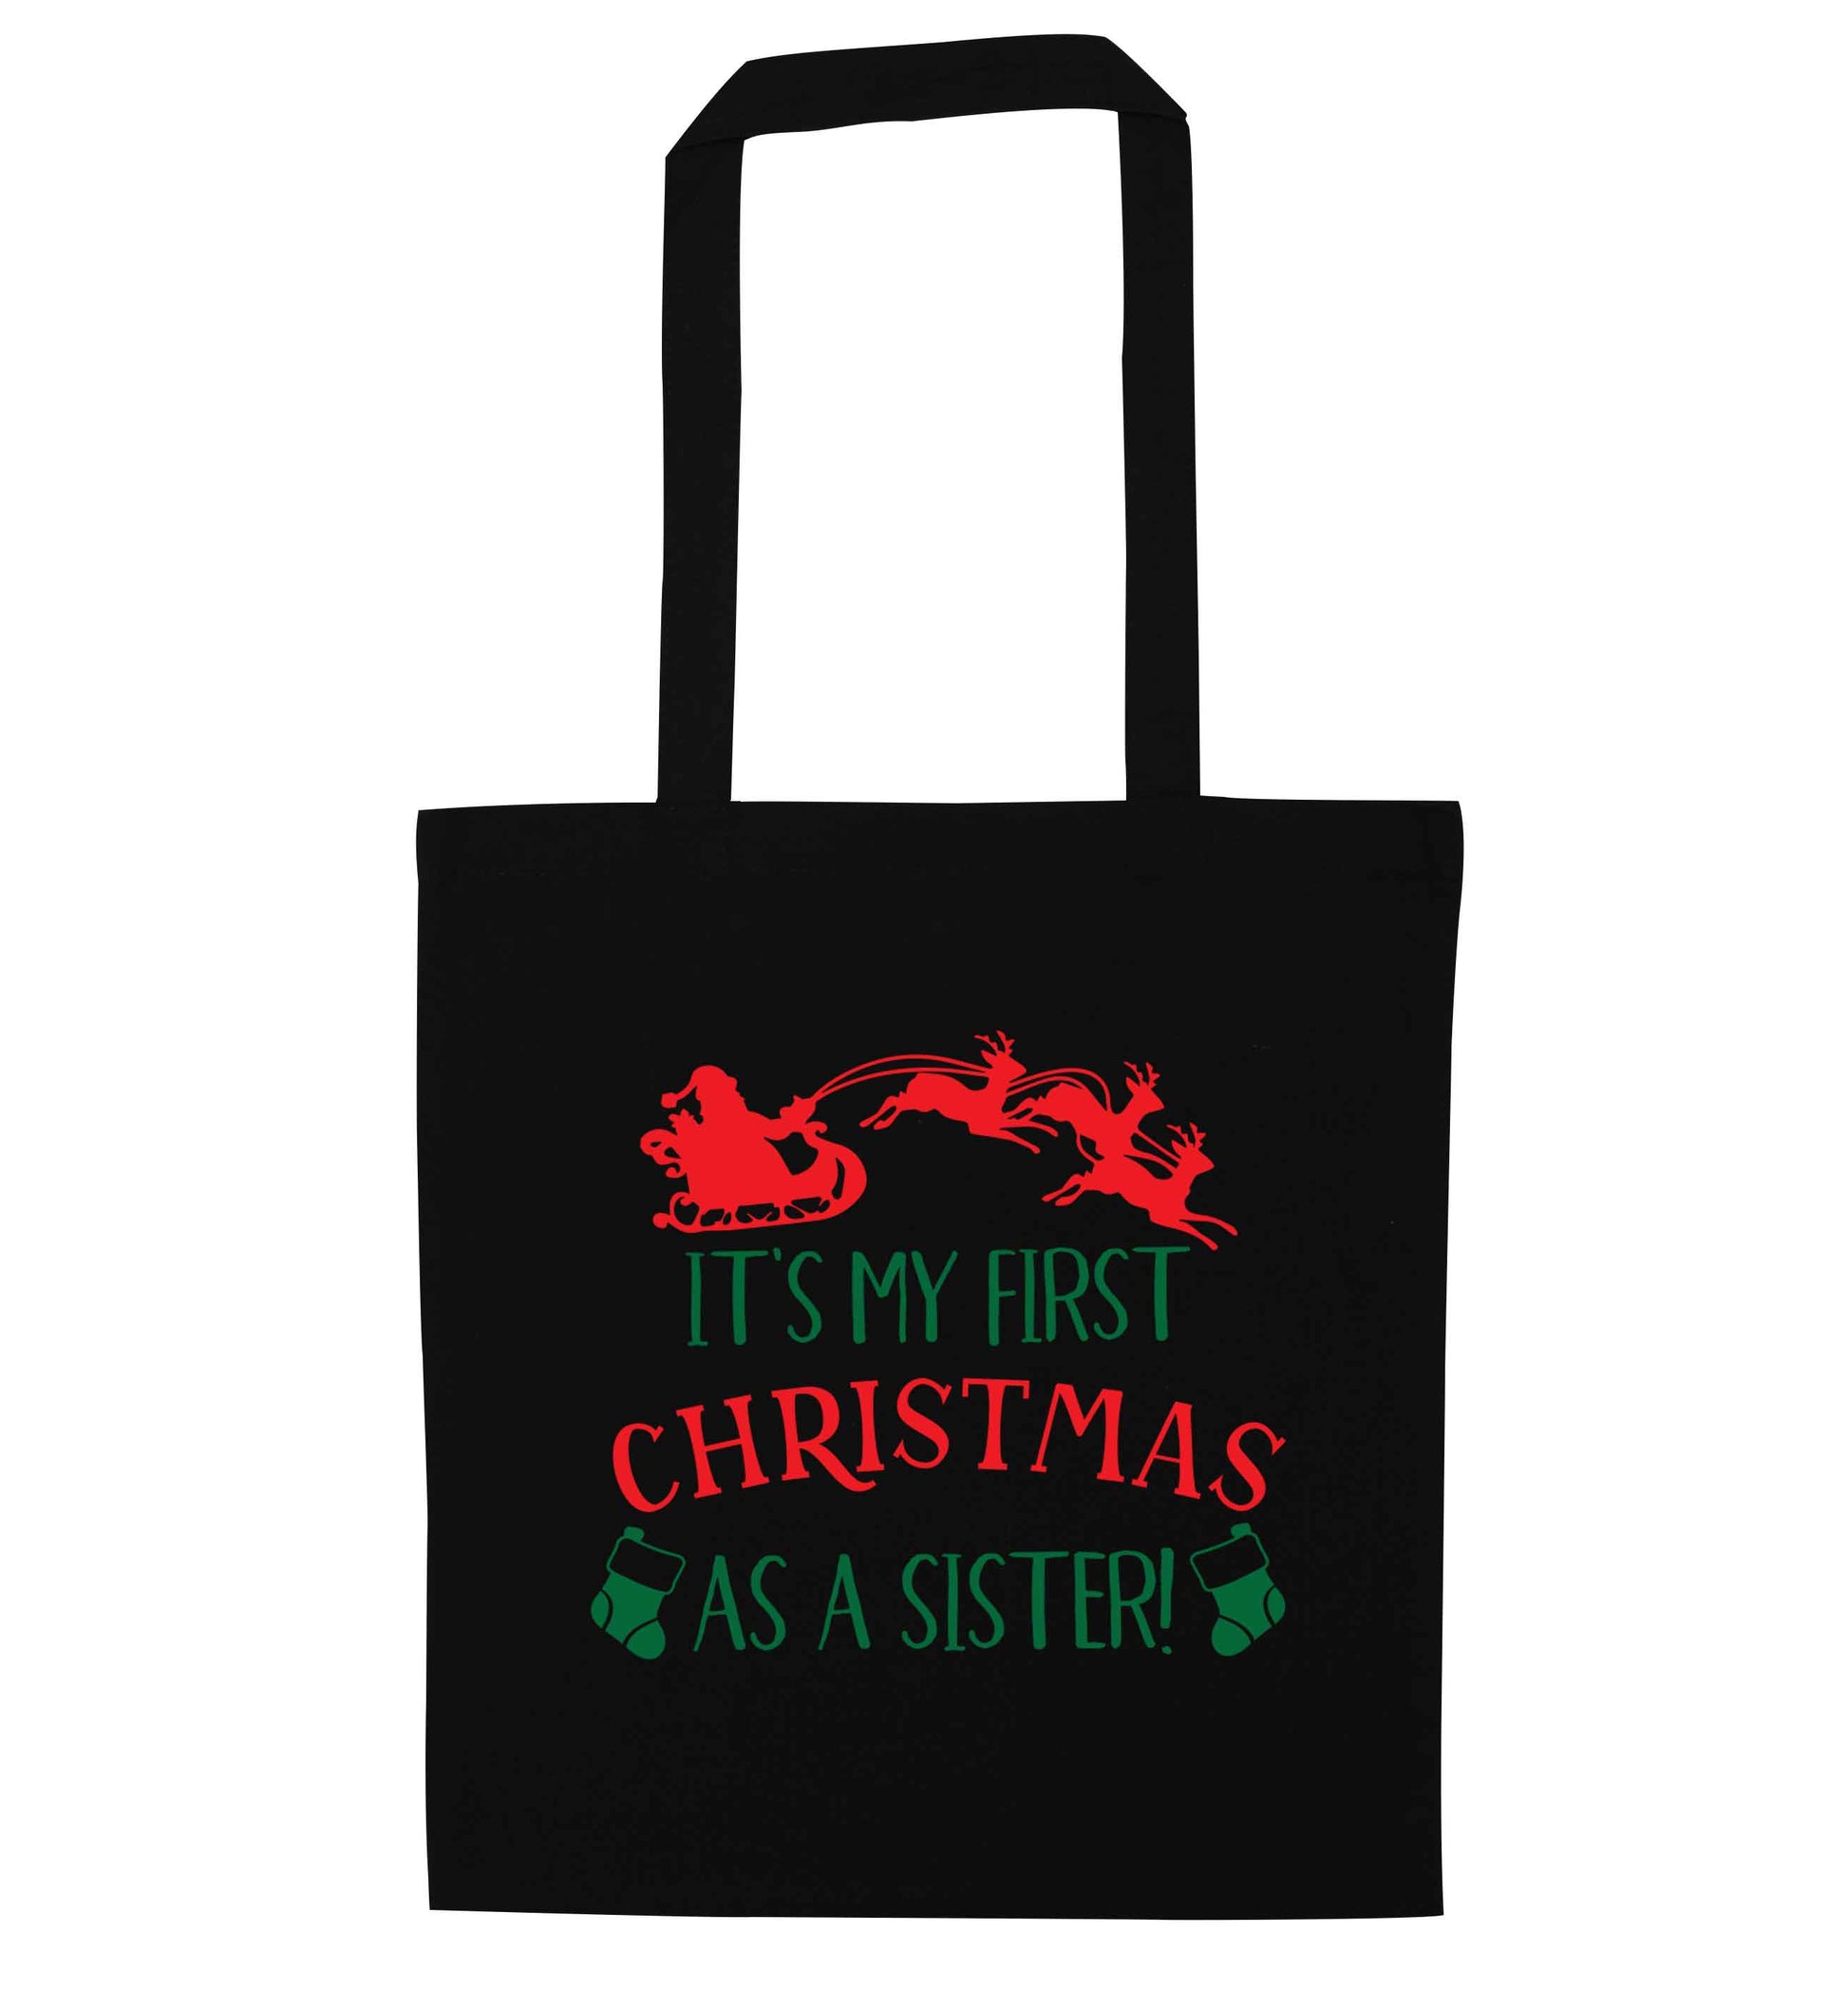 It's my first Christmas as a sister! black tote bag